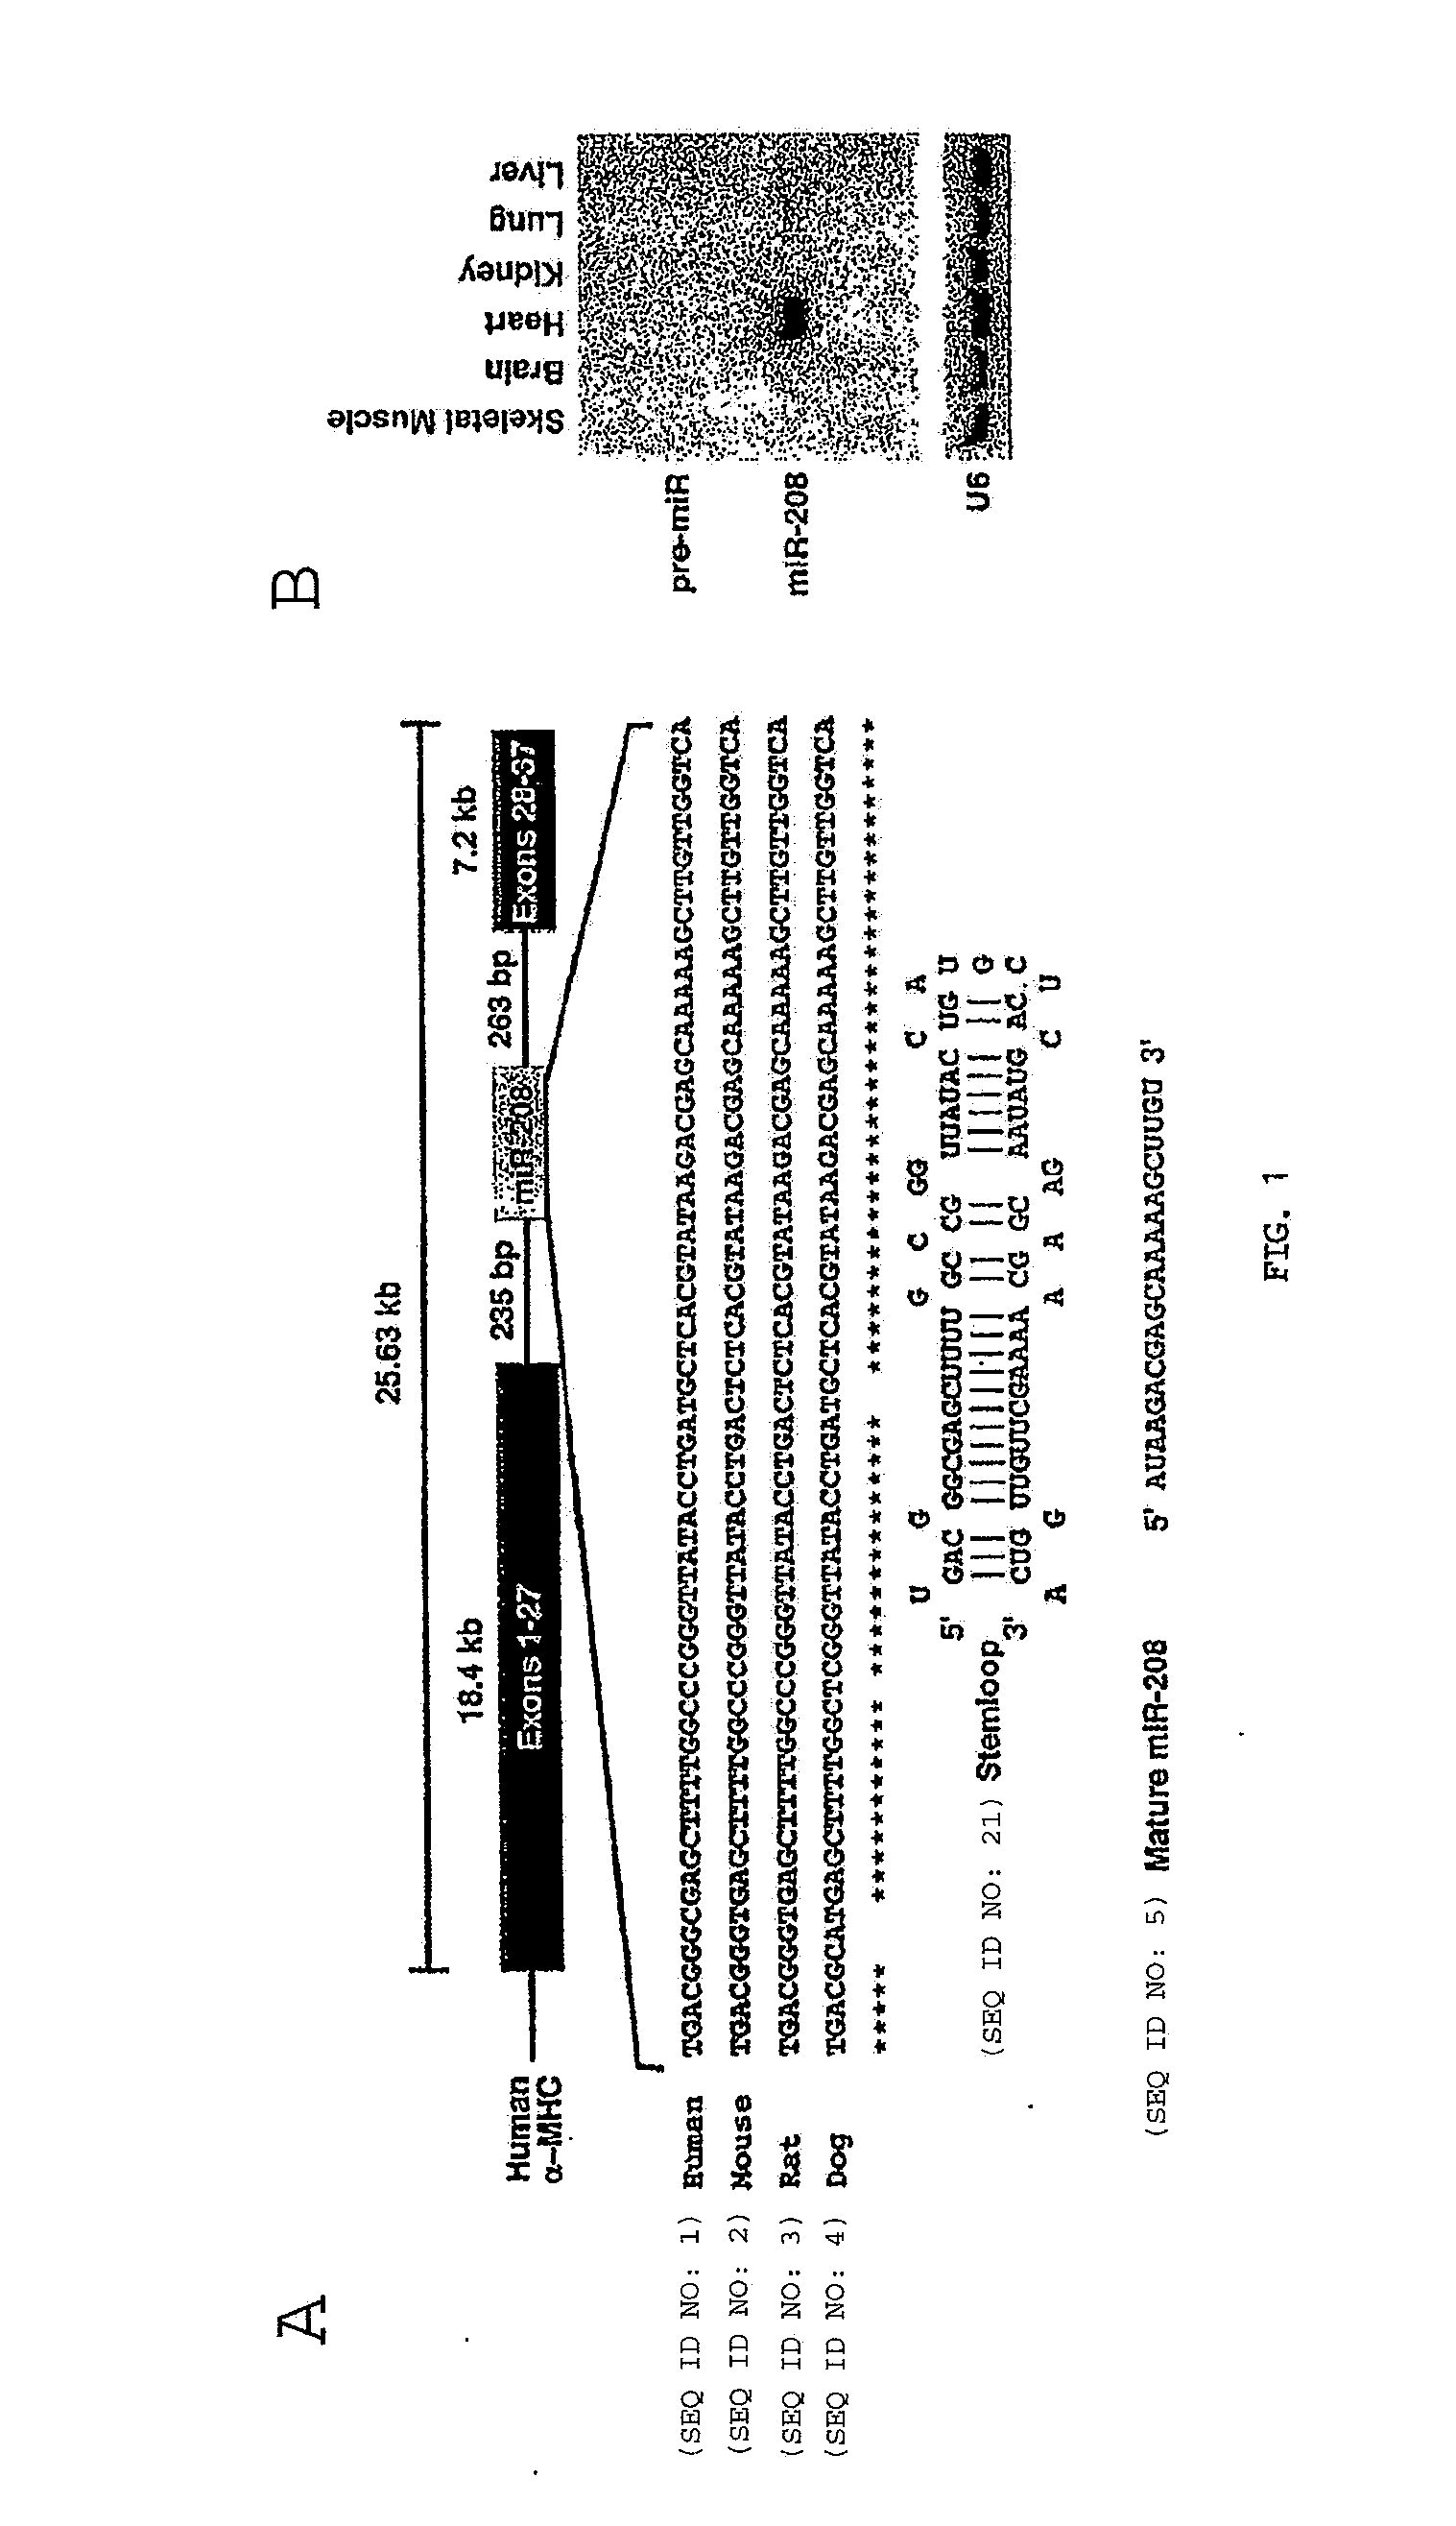 A micro-rna family that modulates fibrosis and uses thereof